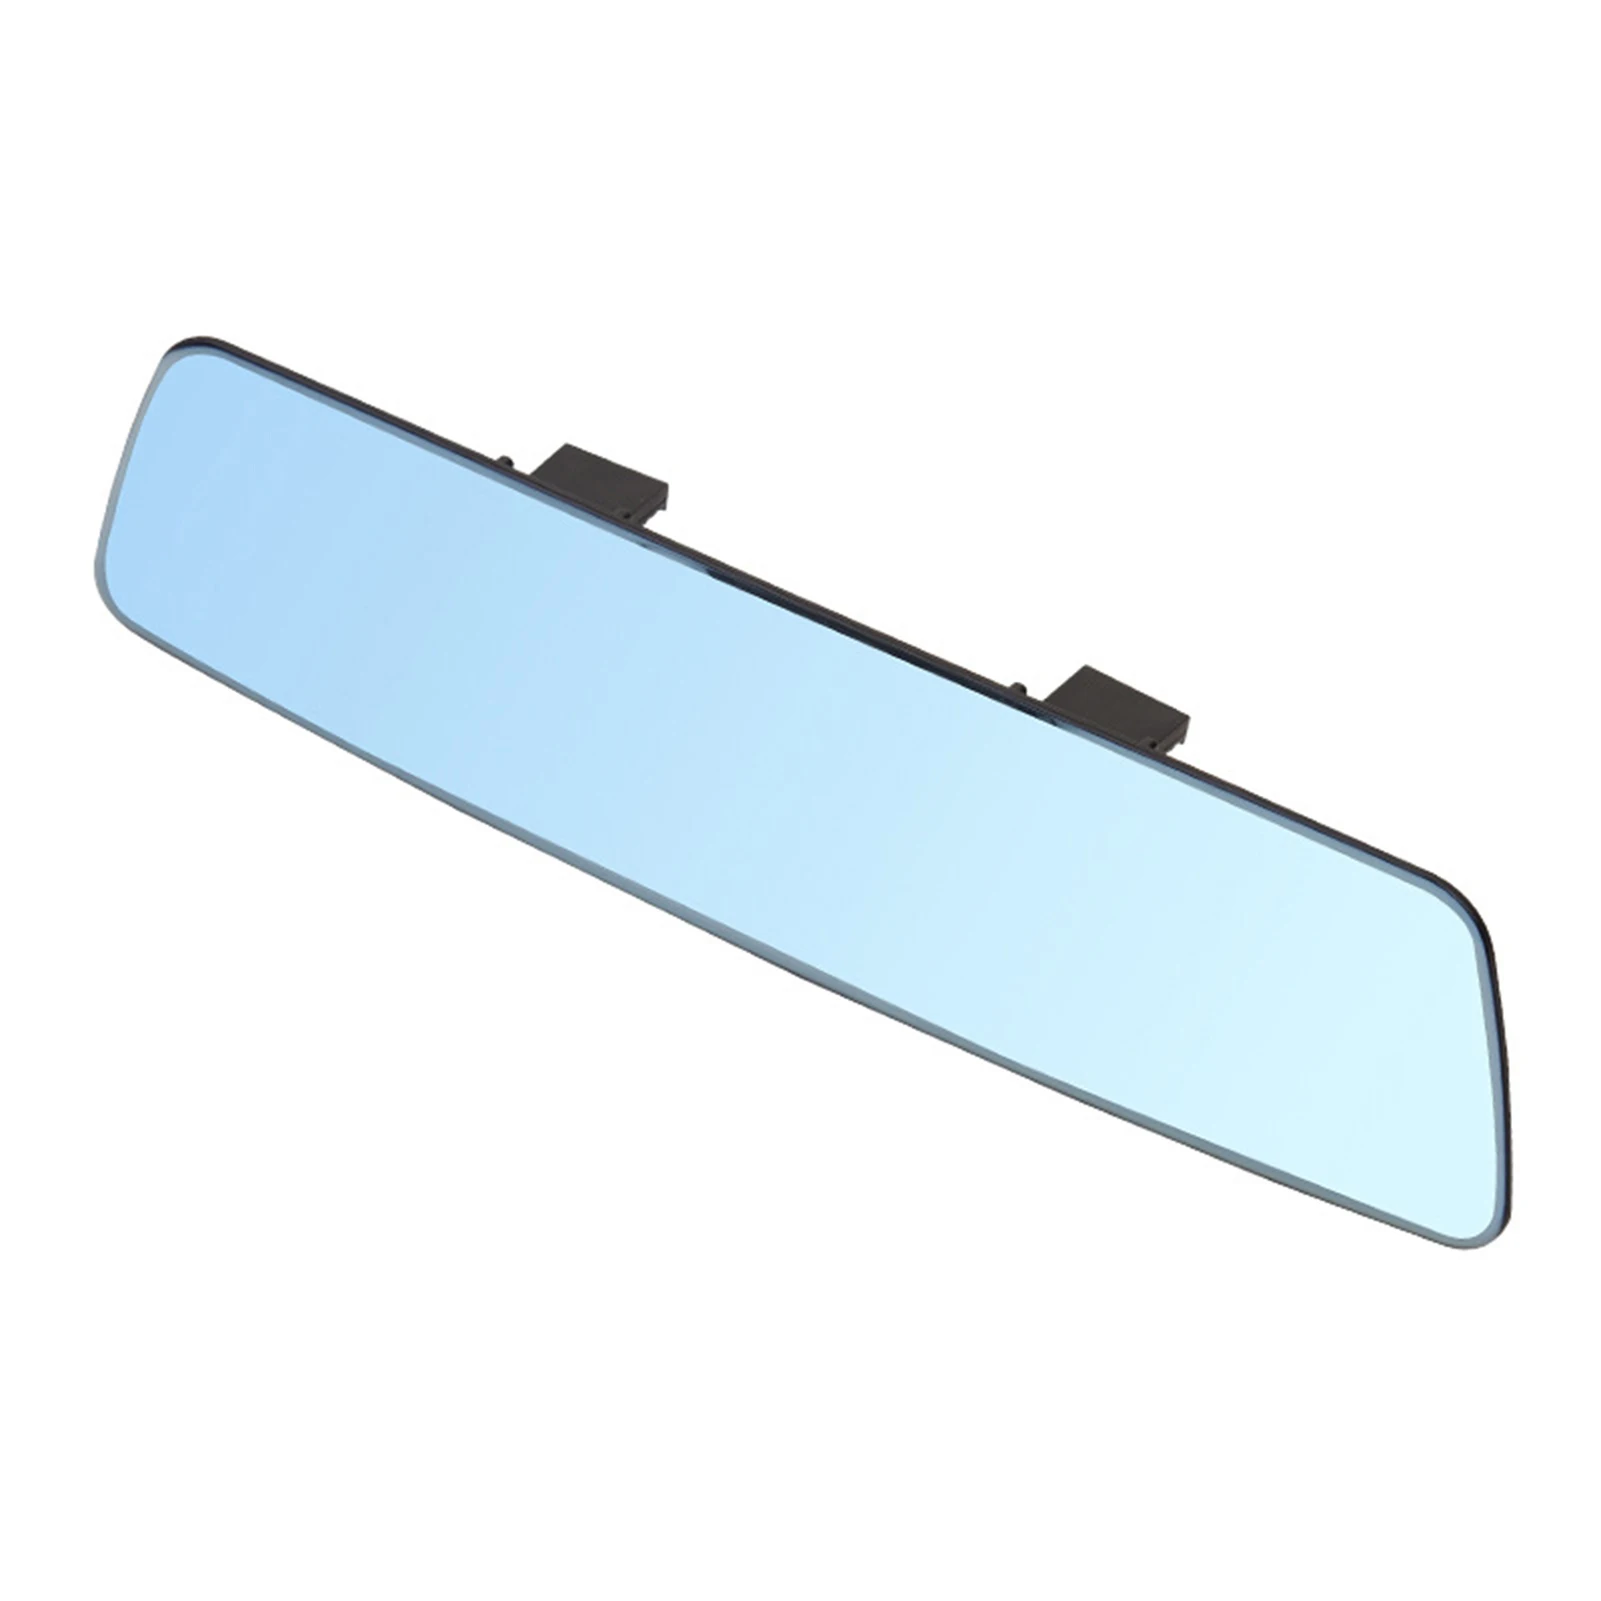 

2.5D Screen Rearview Mirror Clip-On Wide Angles Rear View Mirrors Reduce Blind Spot Effectively For Car SUV Trucks Gifts For